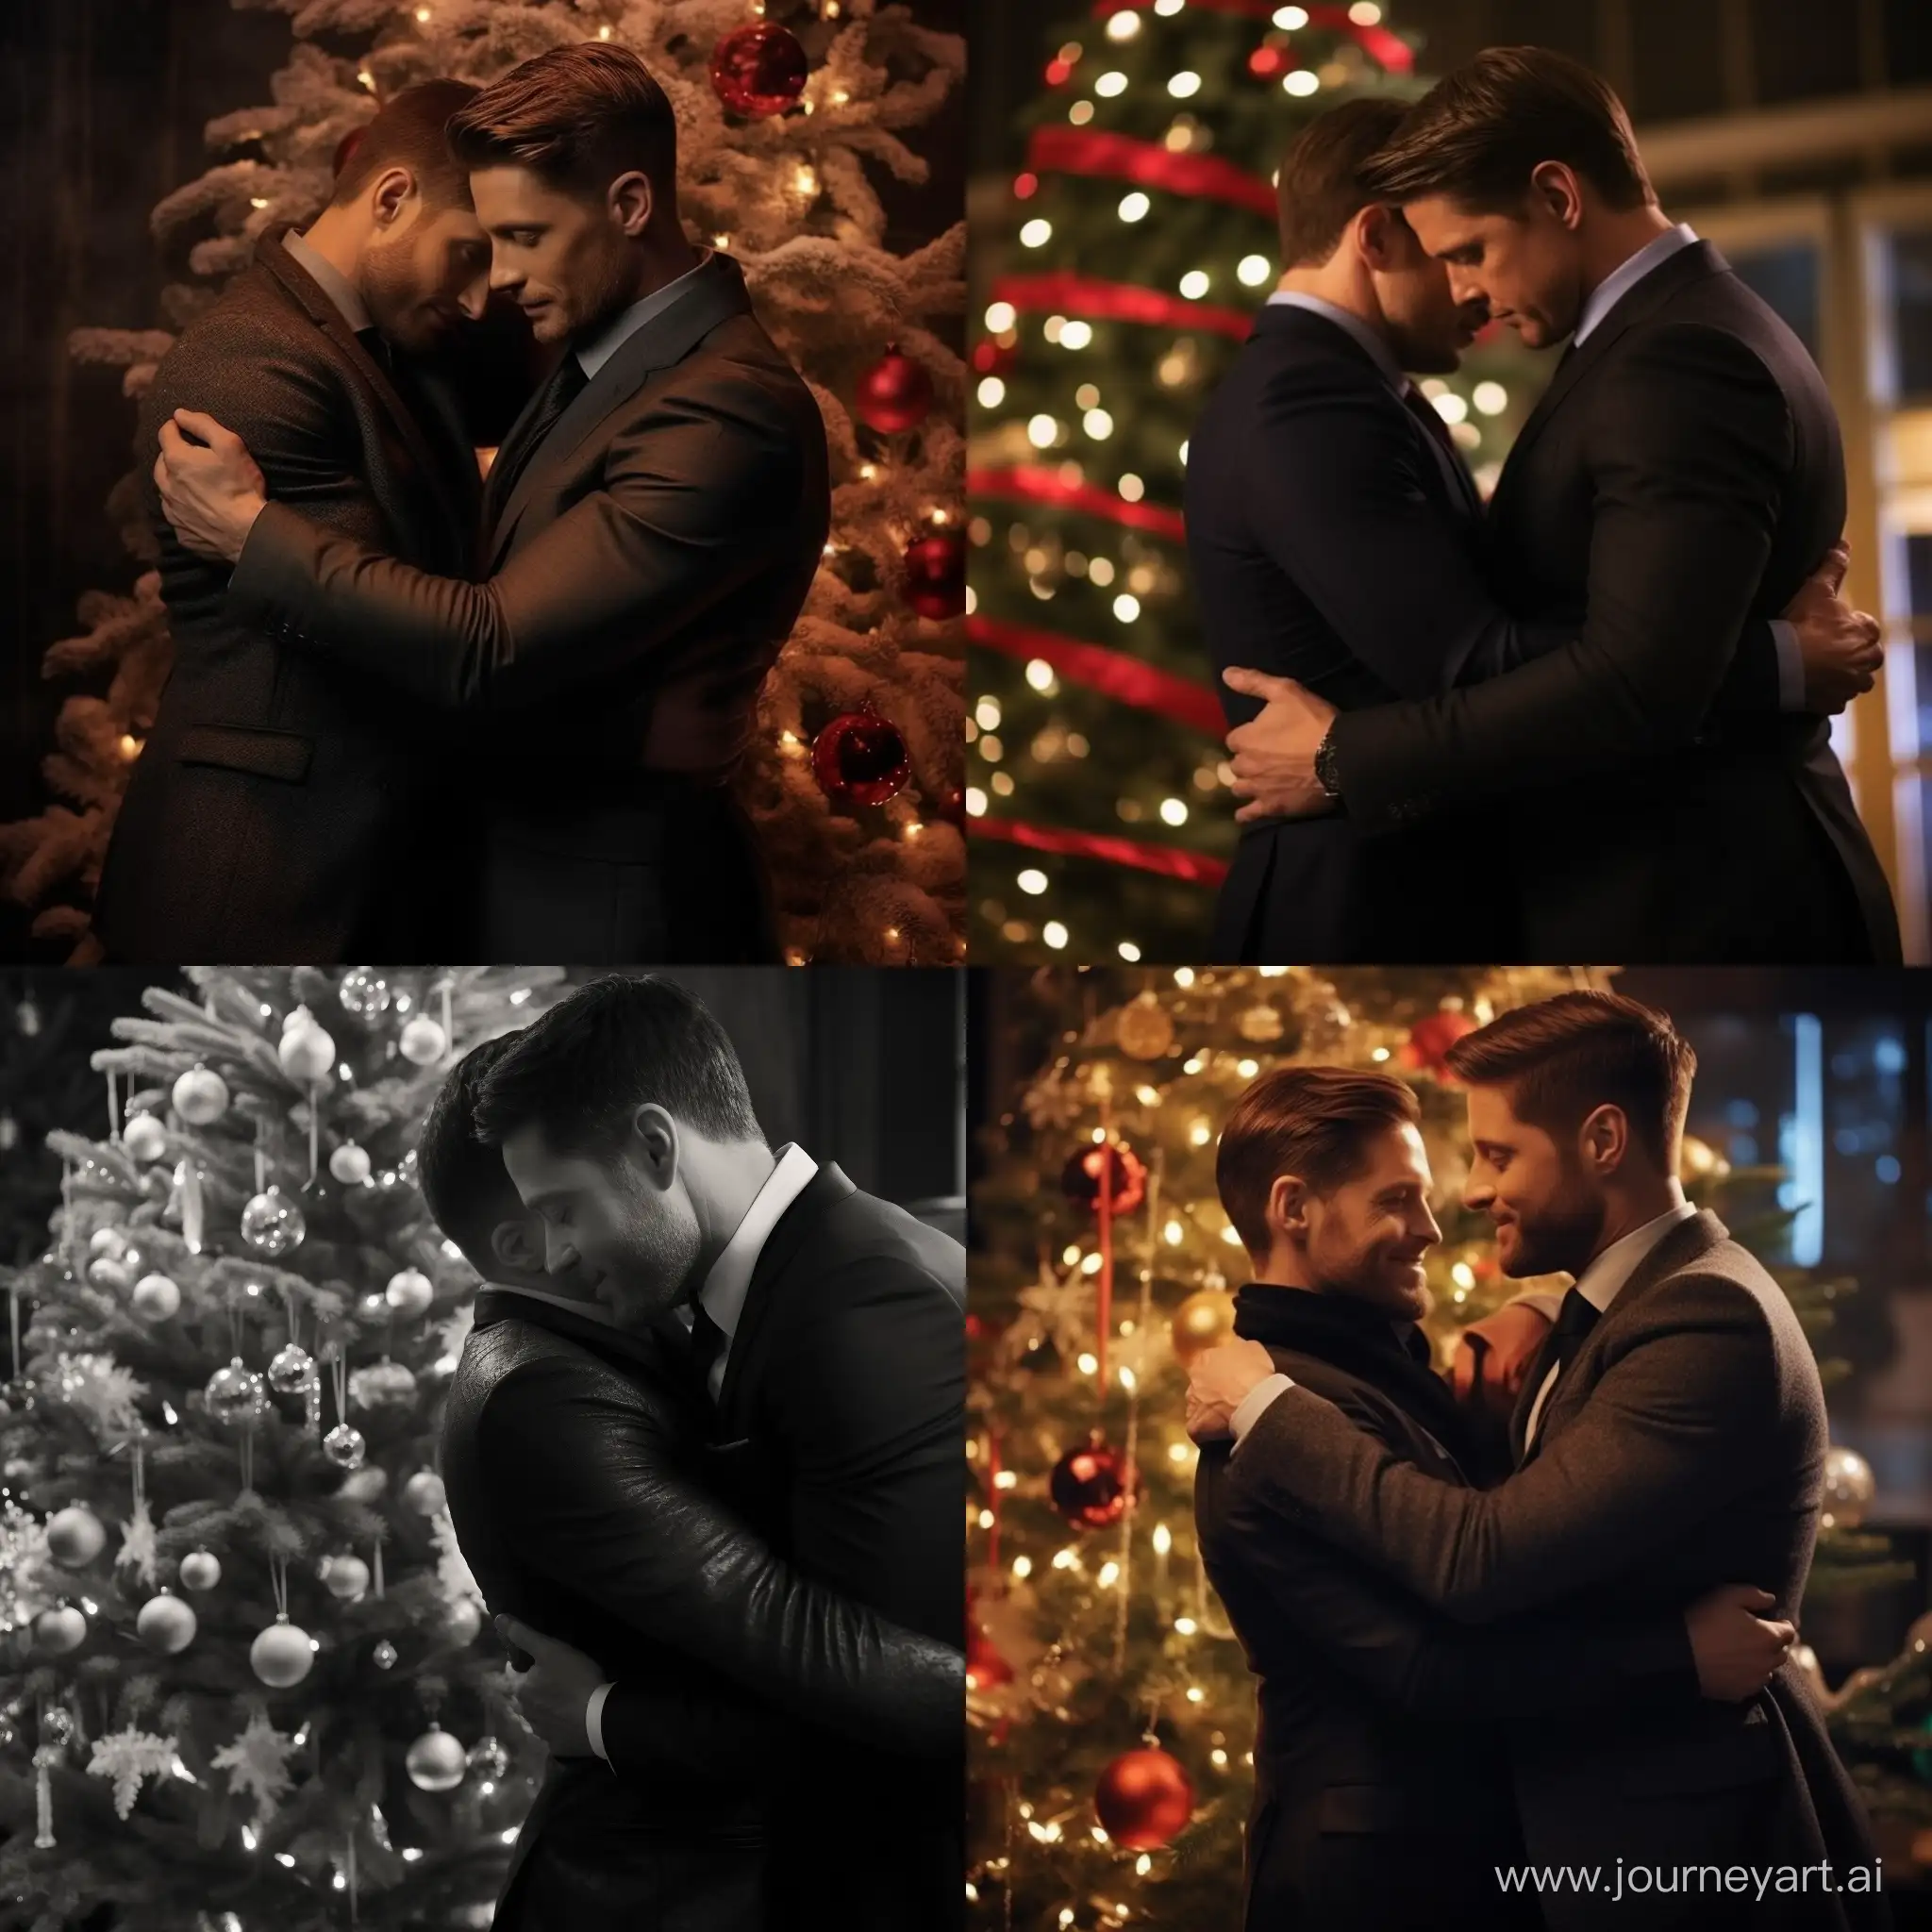 Celebrating-New-Year-with-Joyful-Hugs-Dean-Winchester-and-Jensen-Ackles-Embrace-by-the-Christmas-Tree